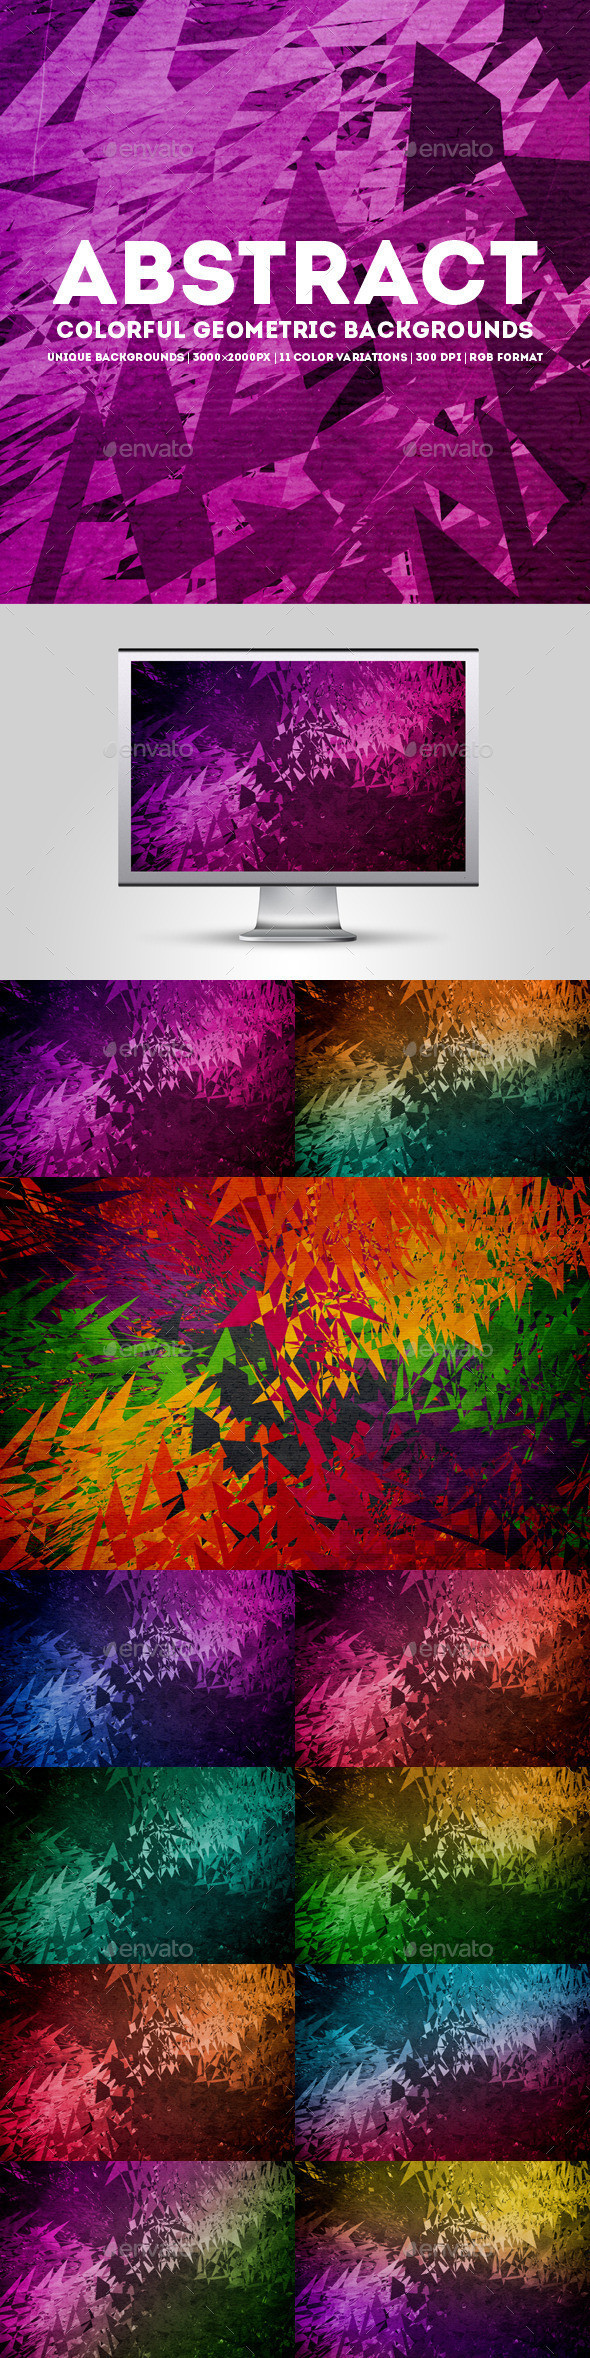 Abstract 20colorful 20geometric 20backgrounds 1